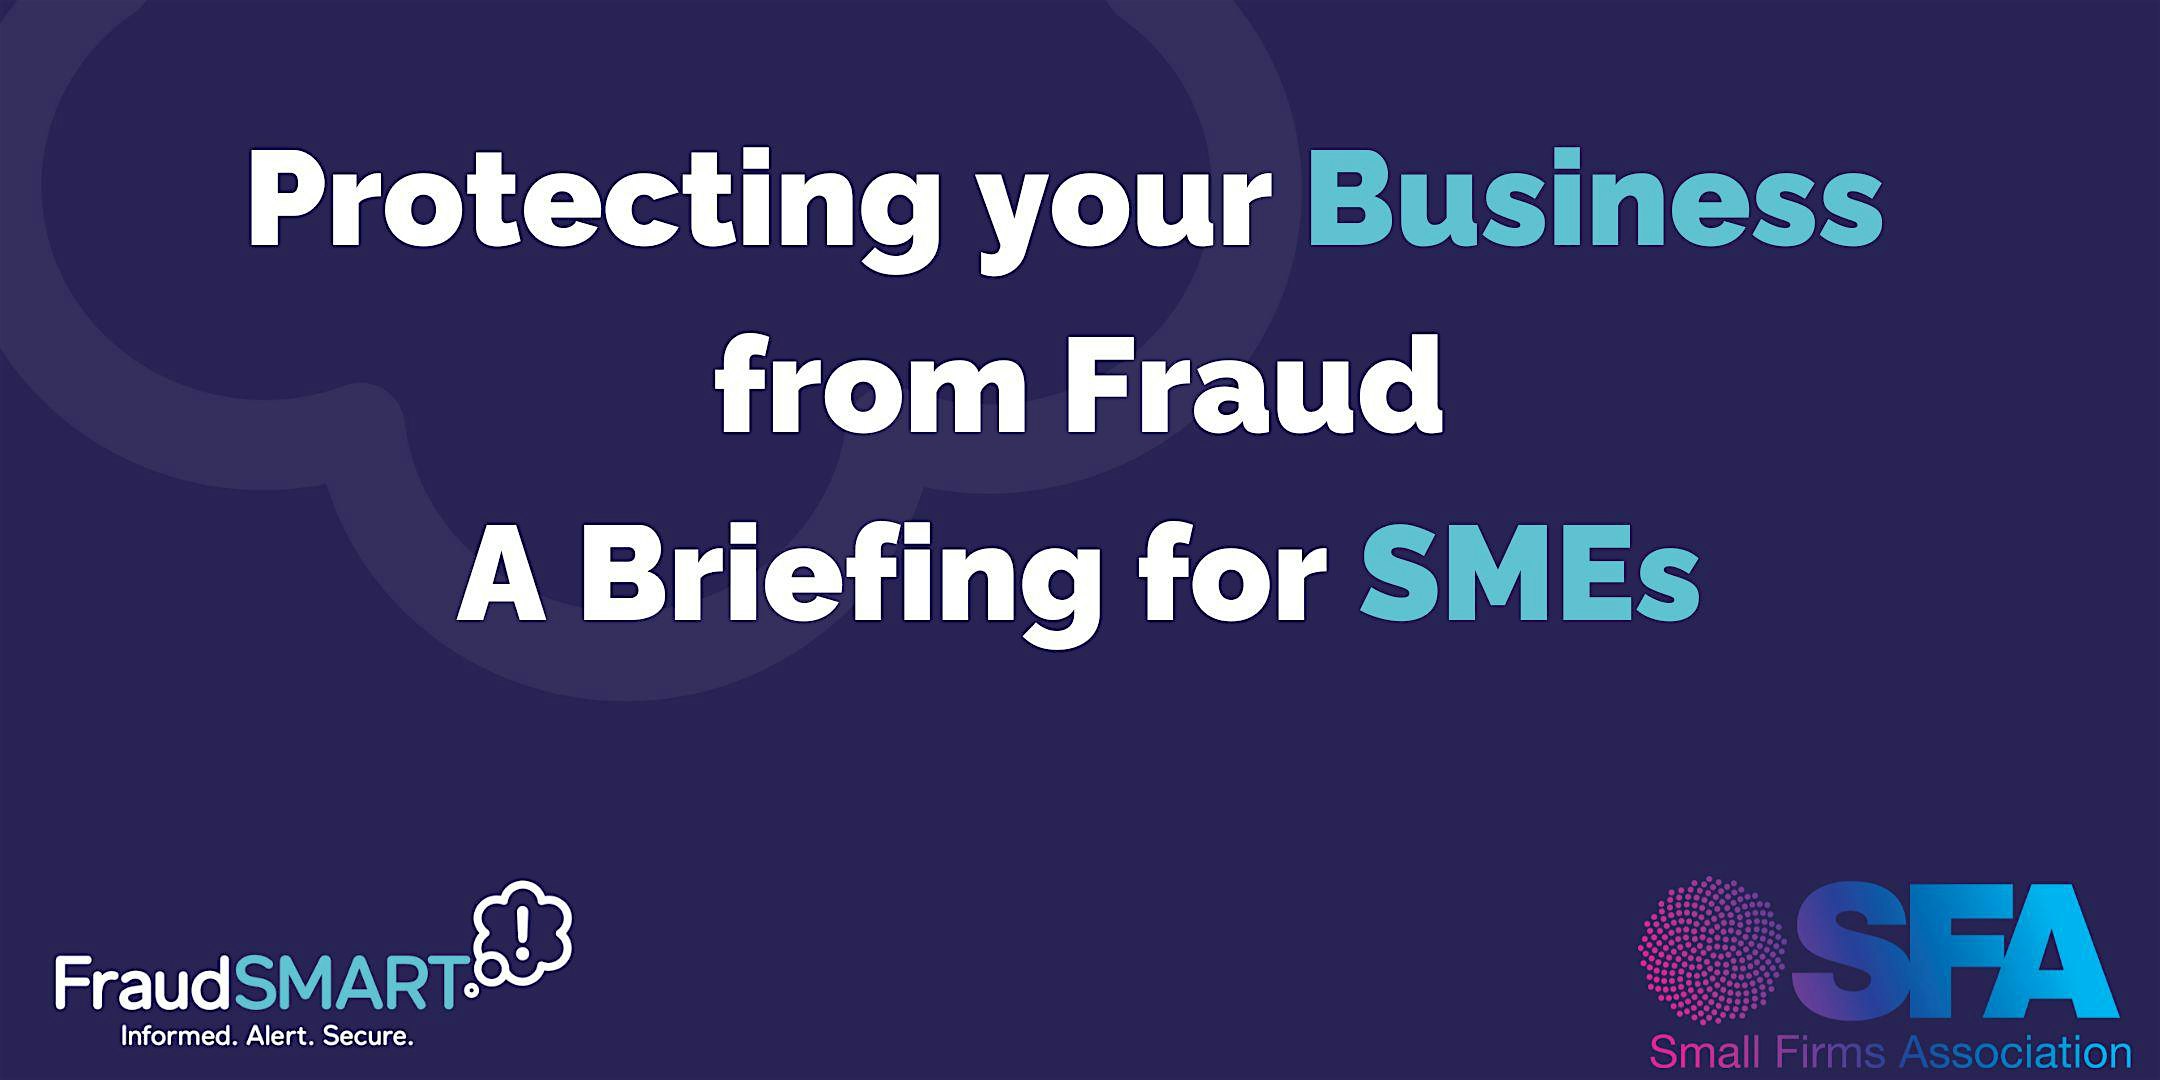 Protecting your Business from Fraud  – the FraudSMART Campaign